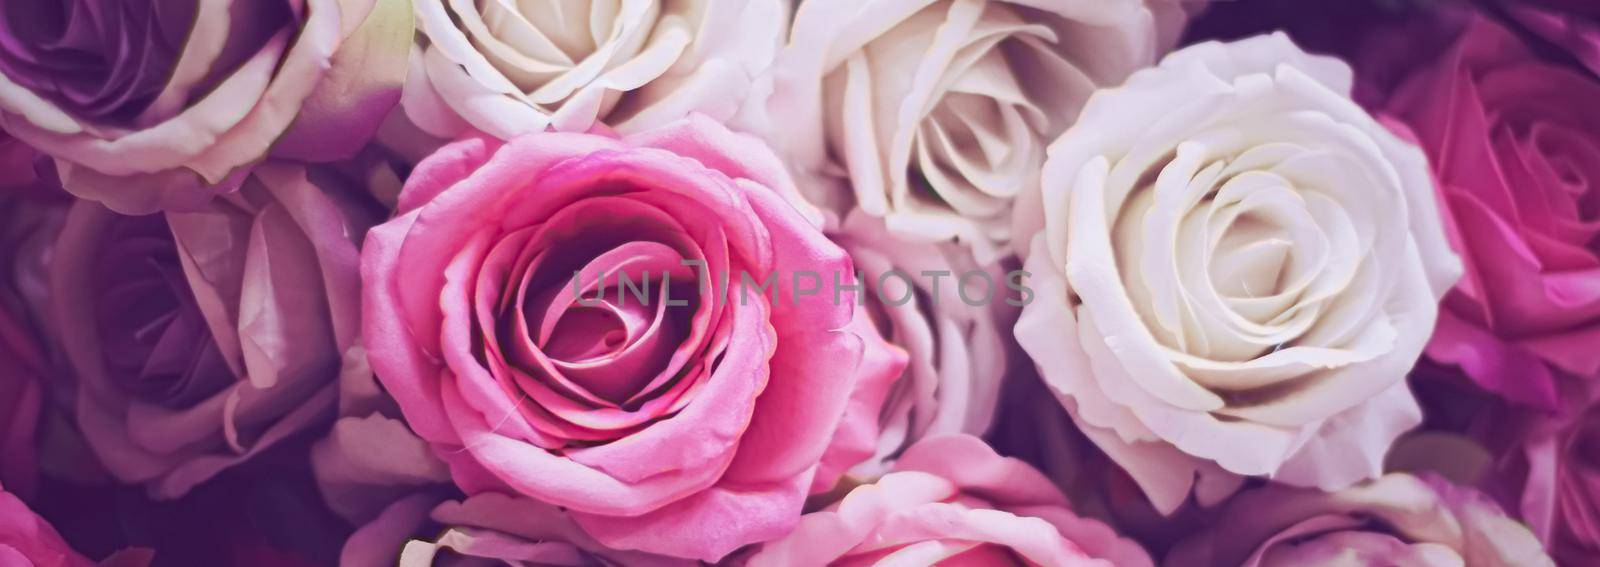 Roses as floral decoration for wedding and flower shop decor concept